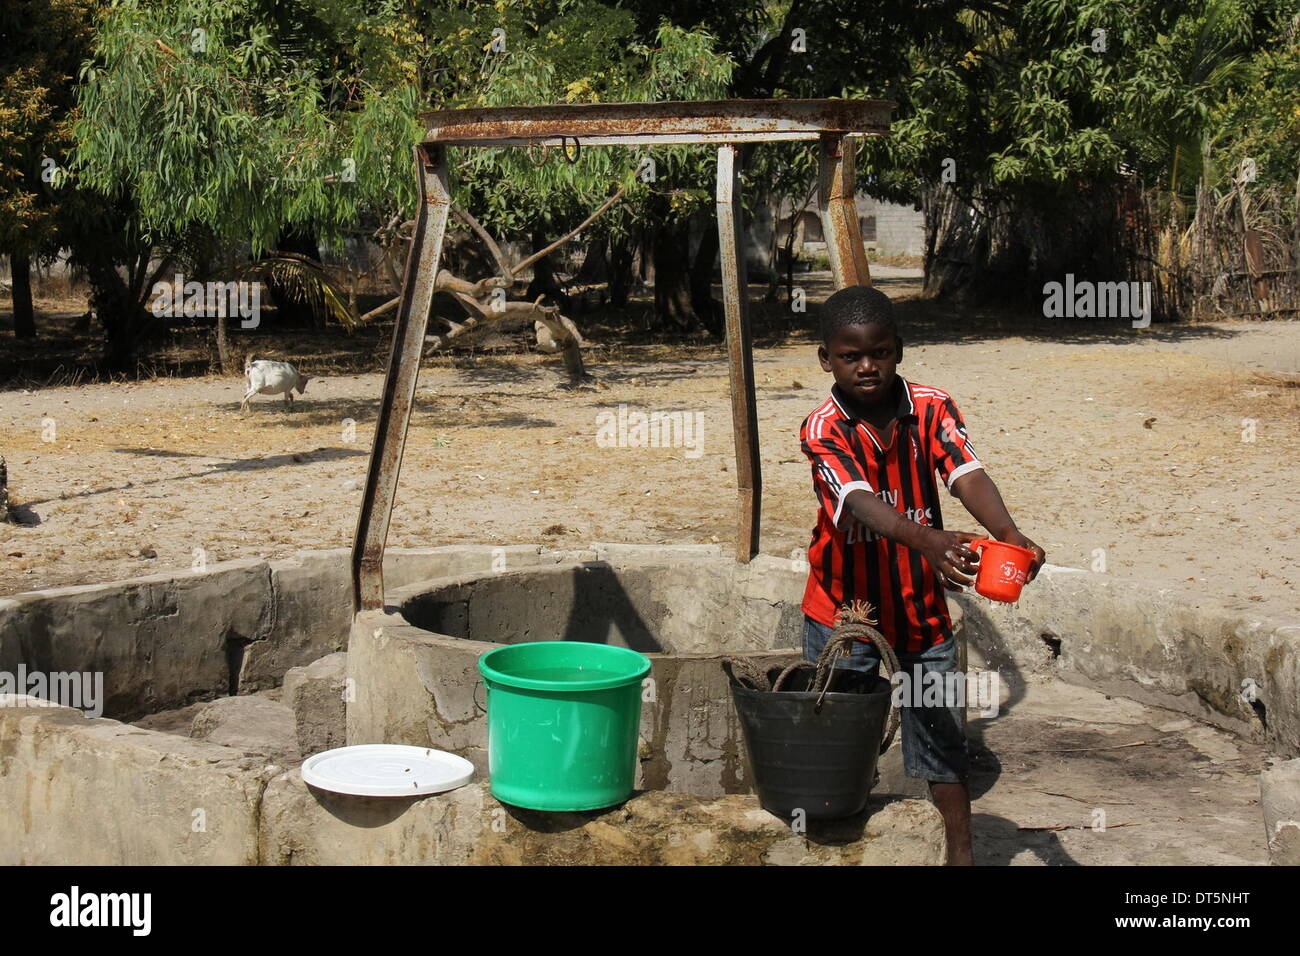 Dakar, Senegal. 4th Feb, 2014. A boy stands beside a well in a village of Jola people, in Casamance, southern Senegal, Feb. 4, 2014. The Jola (Diola, in French transliteration) is an ethnic group in Senegal, where they predominate in the region of Casamance. The Jolas are believed to have migrated to Casamance before the 13th century and kept a traditional lifestyle till now. © Tai Jianqiu/Xinhua/Alamy Live News Stock Photo